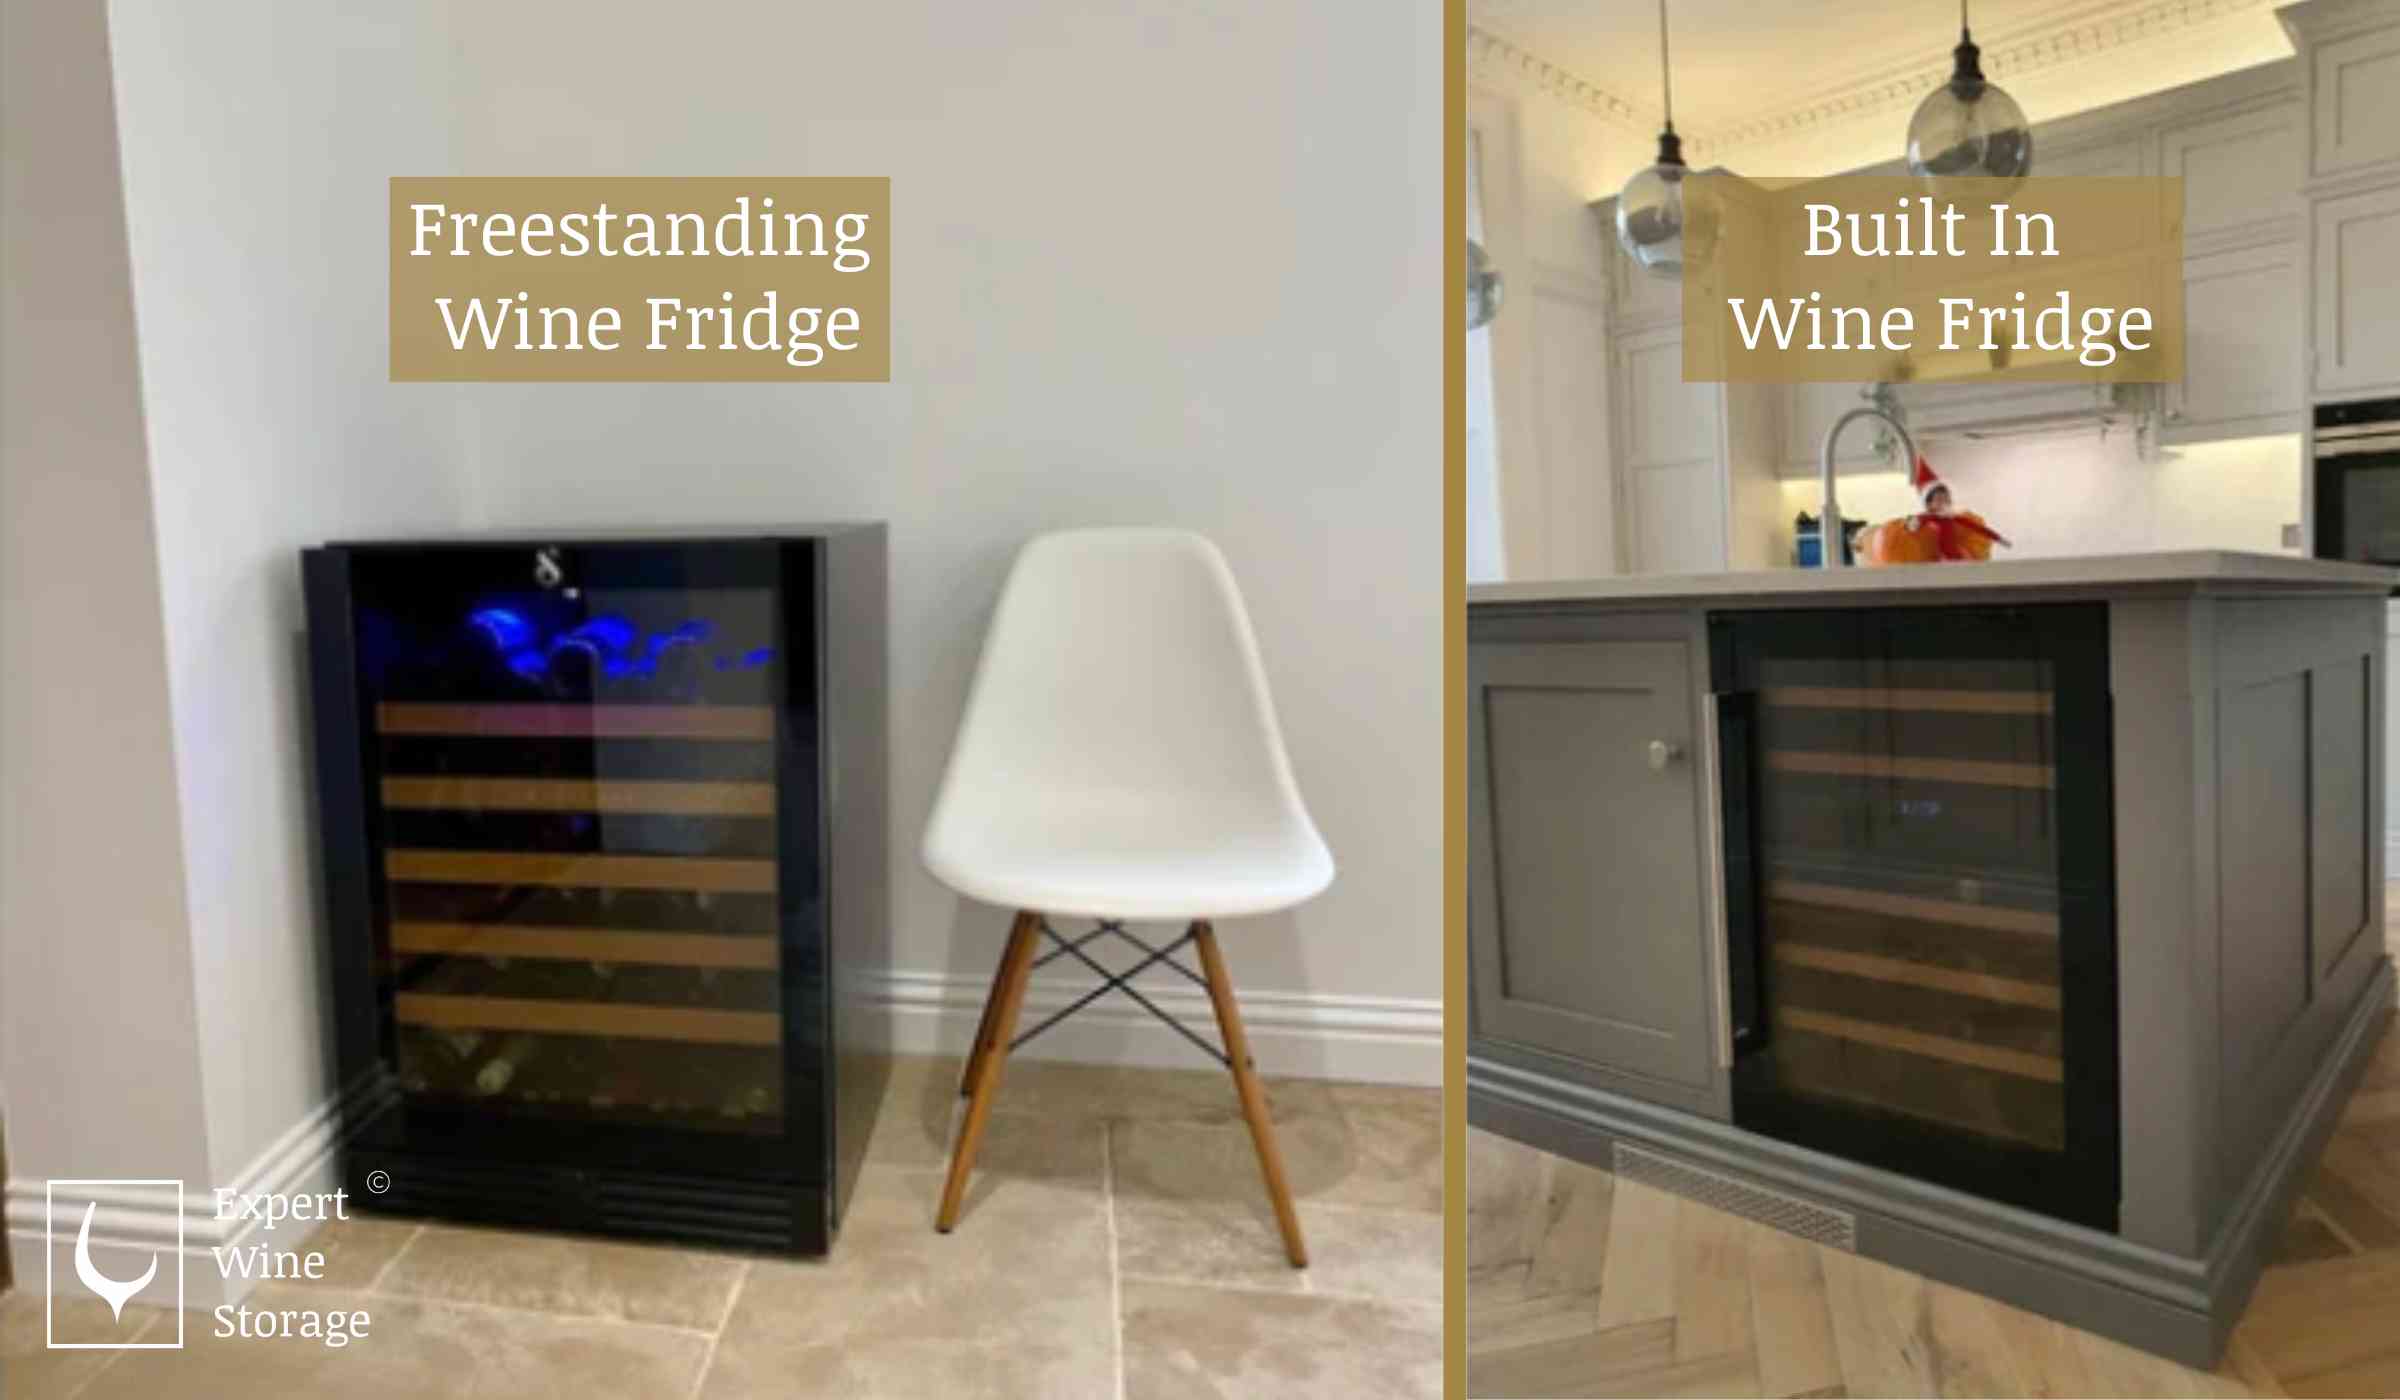 Wine Fridge Positioned Freestanding and Built In